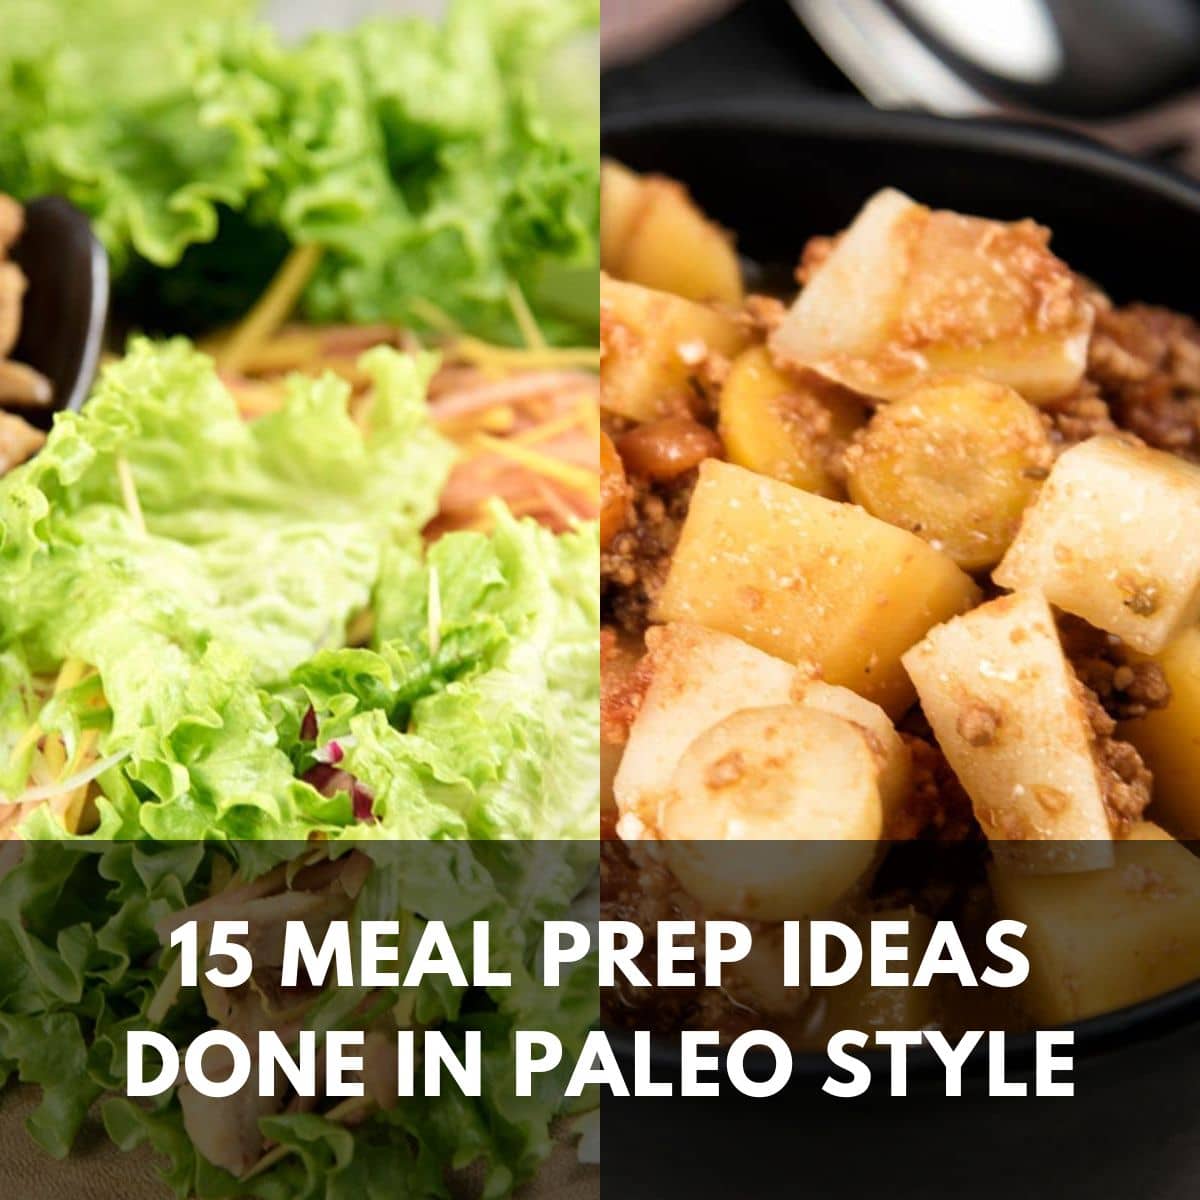 15 Meal Prep Ideas Done in Paleo Style